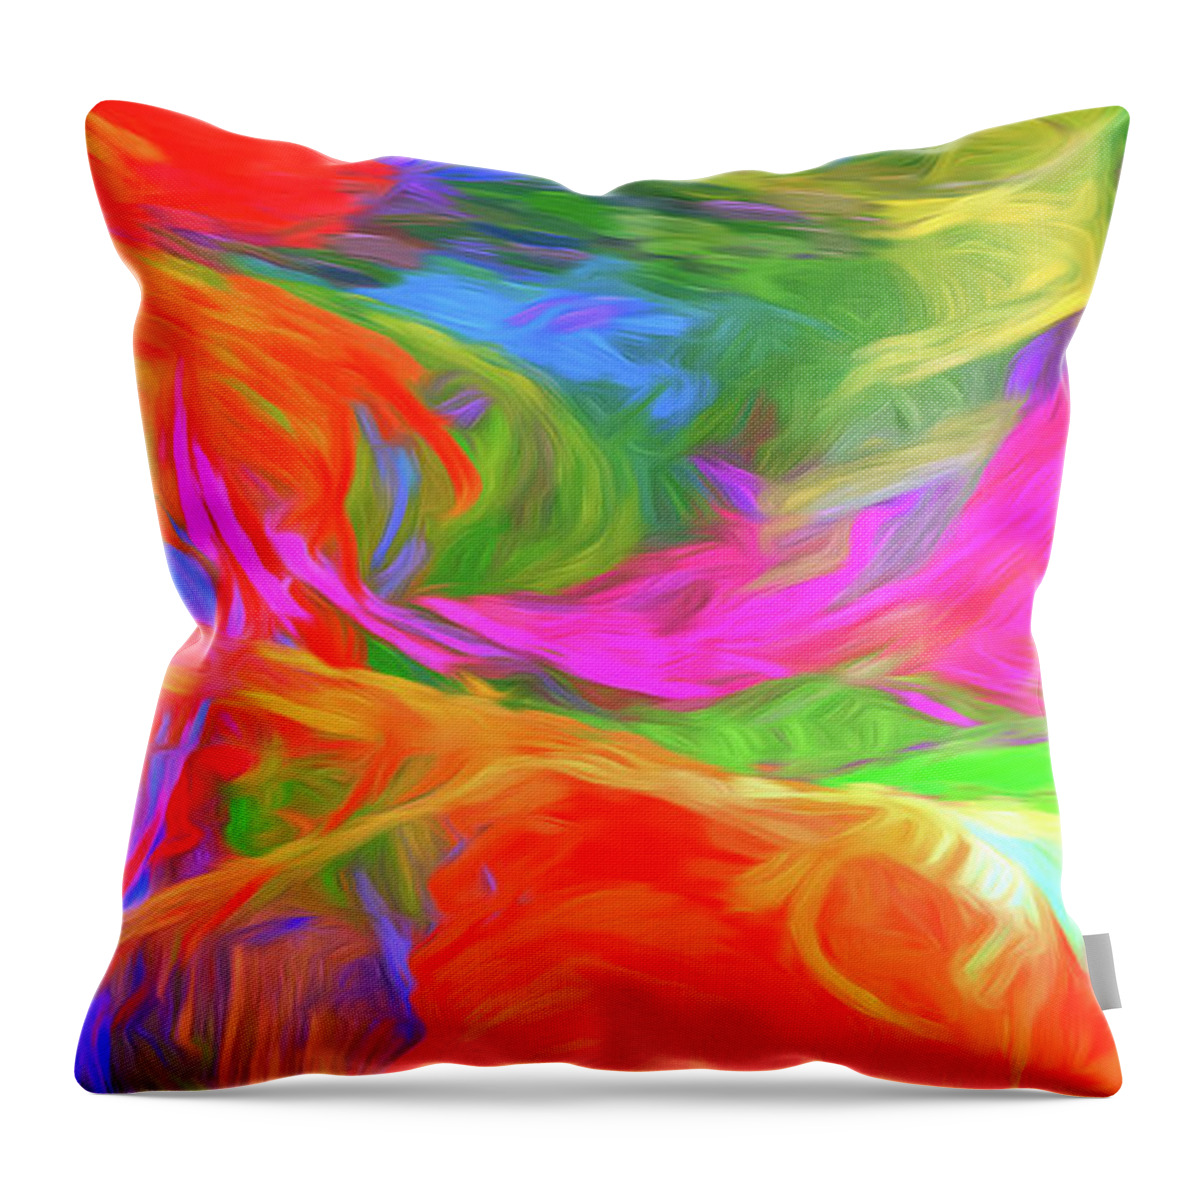 Panorama Throw Pillow featuring the digital art Andee Design Abstract 5 2015 by Andee Design